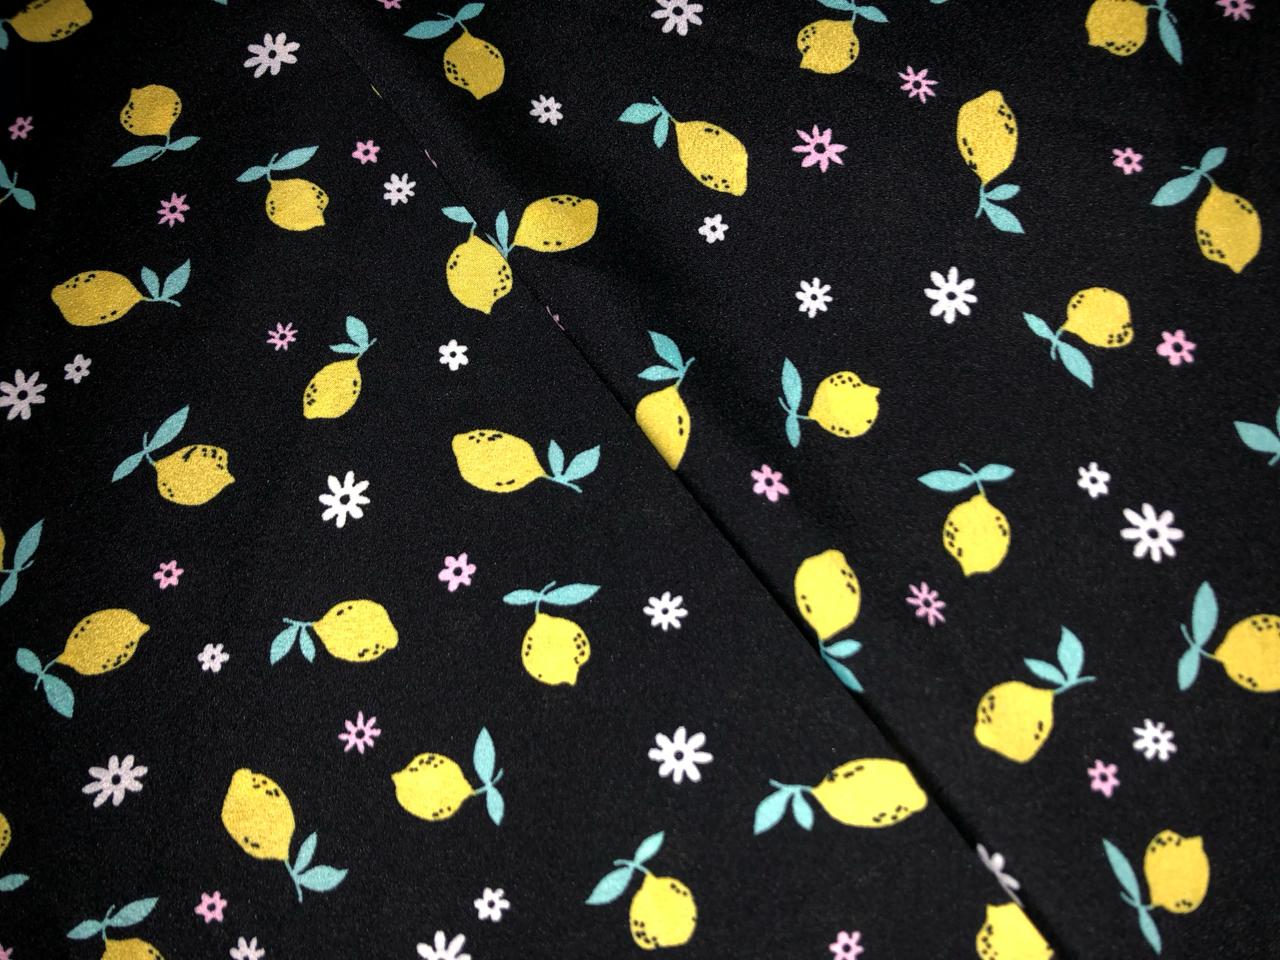 Crepe Digital print fabric 44" wide available in  8 different prints and colors